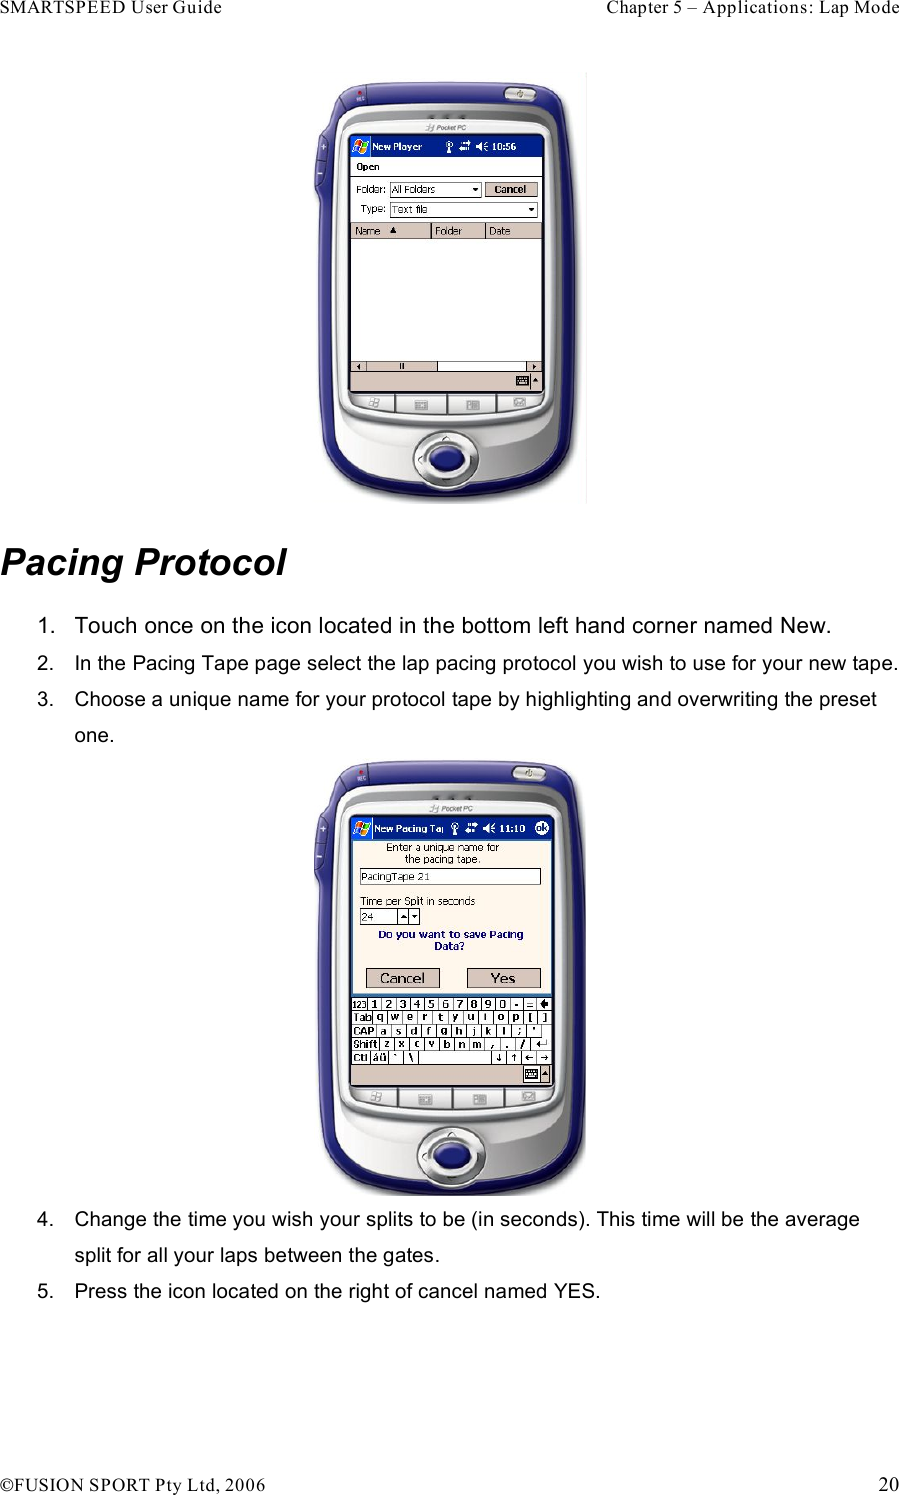 SMARTSPEED User Guide    Chapter 5 – Applications: Lap Mode !FUSION SPORT Pty Ltd, 2006    20  Pacing Protocol 1.  Touch once on the icon located in the bottom left hand corner named New. 2.  In the Pacing Tape page select the lap pacing protocol you wish to use for your new tape. 3.  Choose a unique name for your protocol tape by highlighting and overwriting the preset one.  4.  Change the time you wish your splits to be (in seconds). This time will be the average split for all your laps between the gates.  5.  Press the icon located on the right of cancel named YES. 